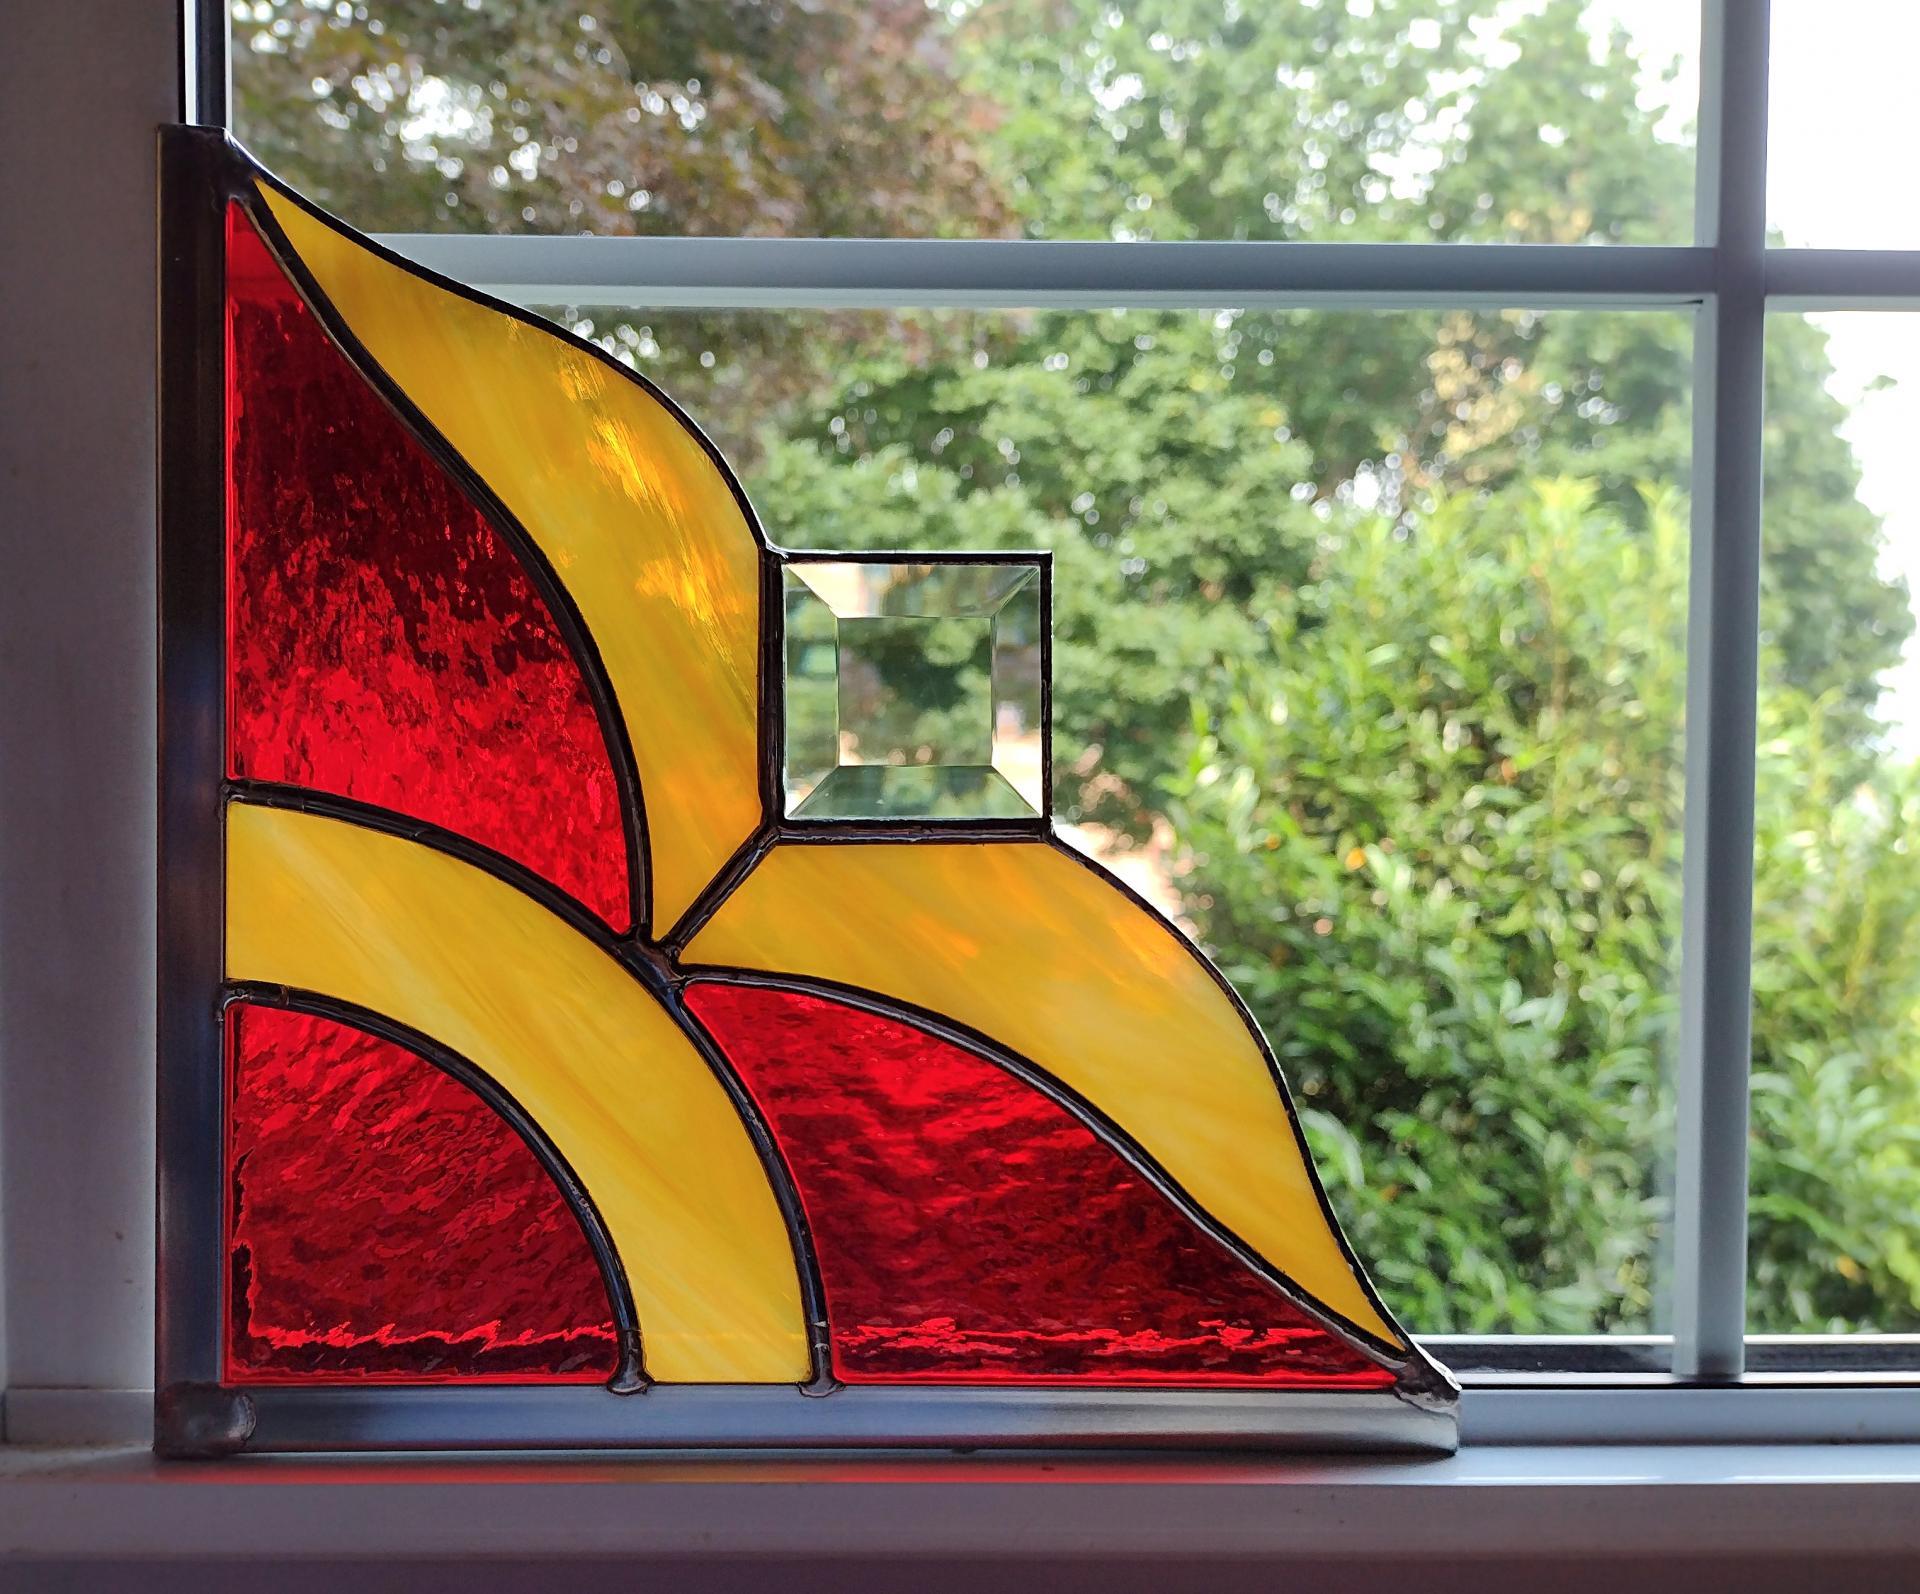 Stained glass corner piece made with alternating red and gold art glass with a clear square bevel prism in the center. Measures nine inches in diameter and is framed on two size in zinc framing for hanging.